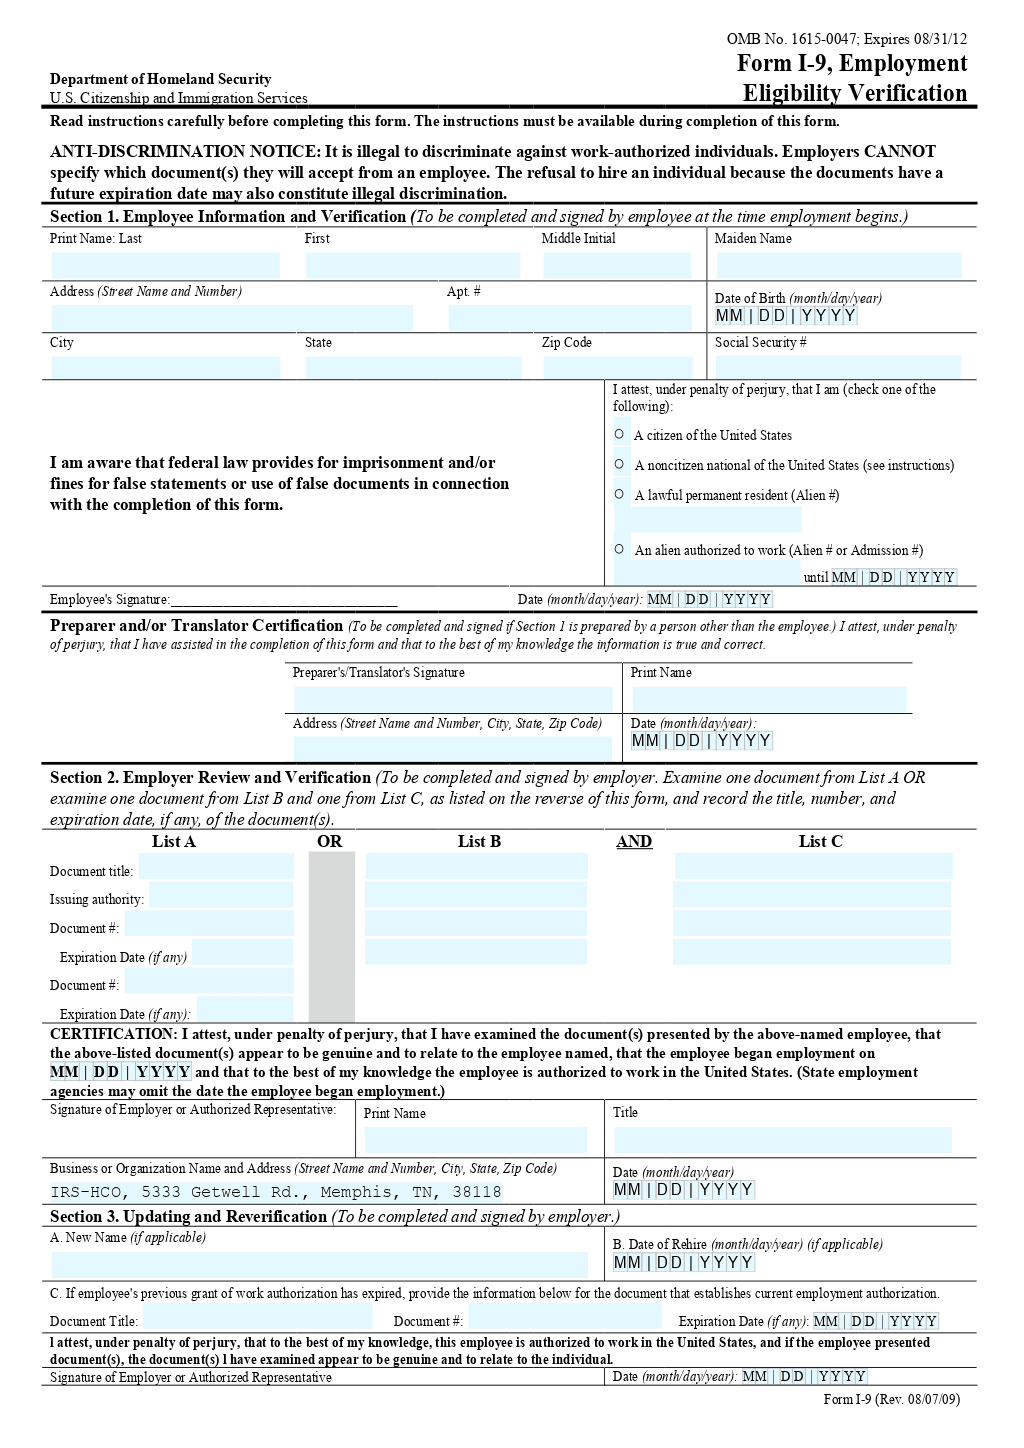 Employment Eligibility Verification Form (I-9) Template within IRS I-9 Form